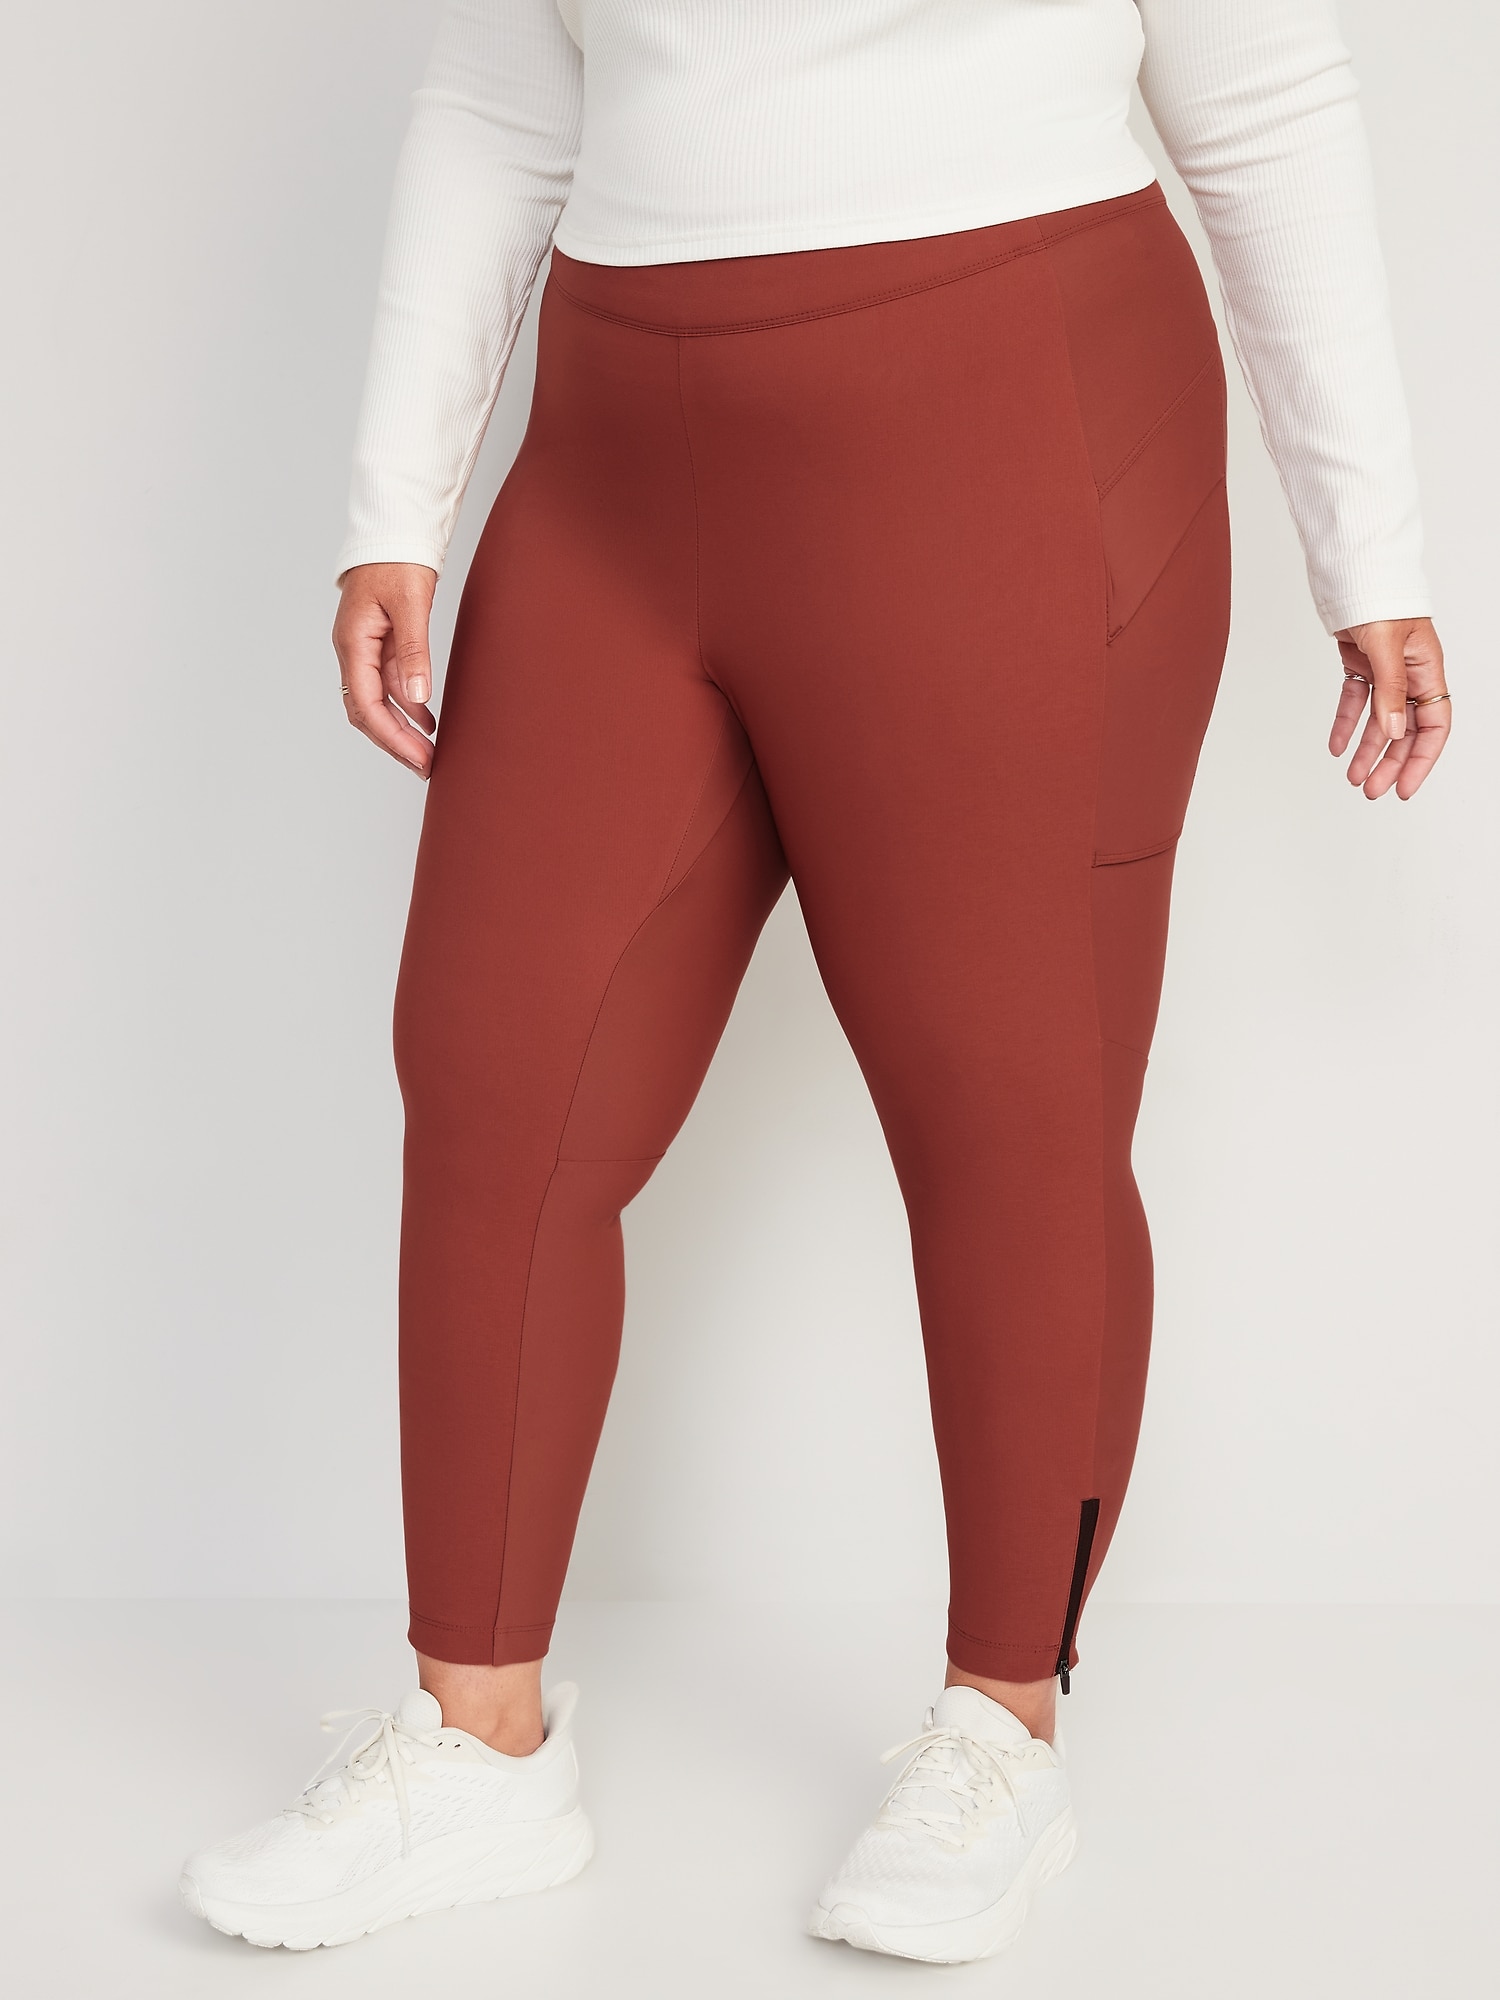 High-Waisted All-Seasons StretchTech 7/8-Length Hybrid Ankle Pants for  Women